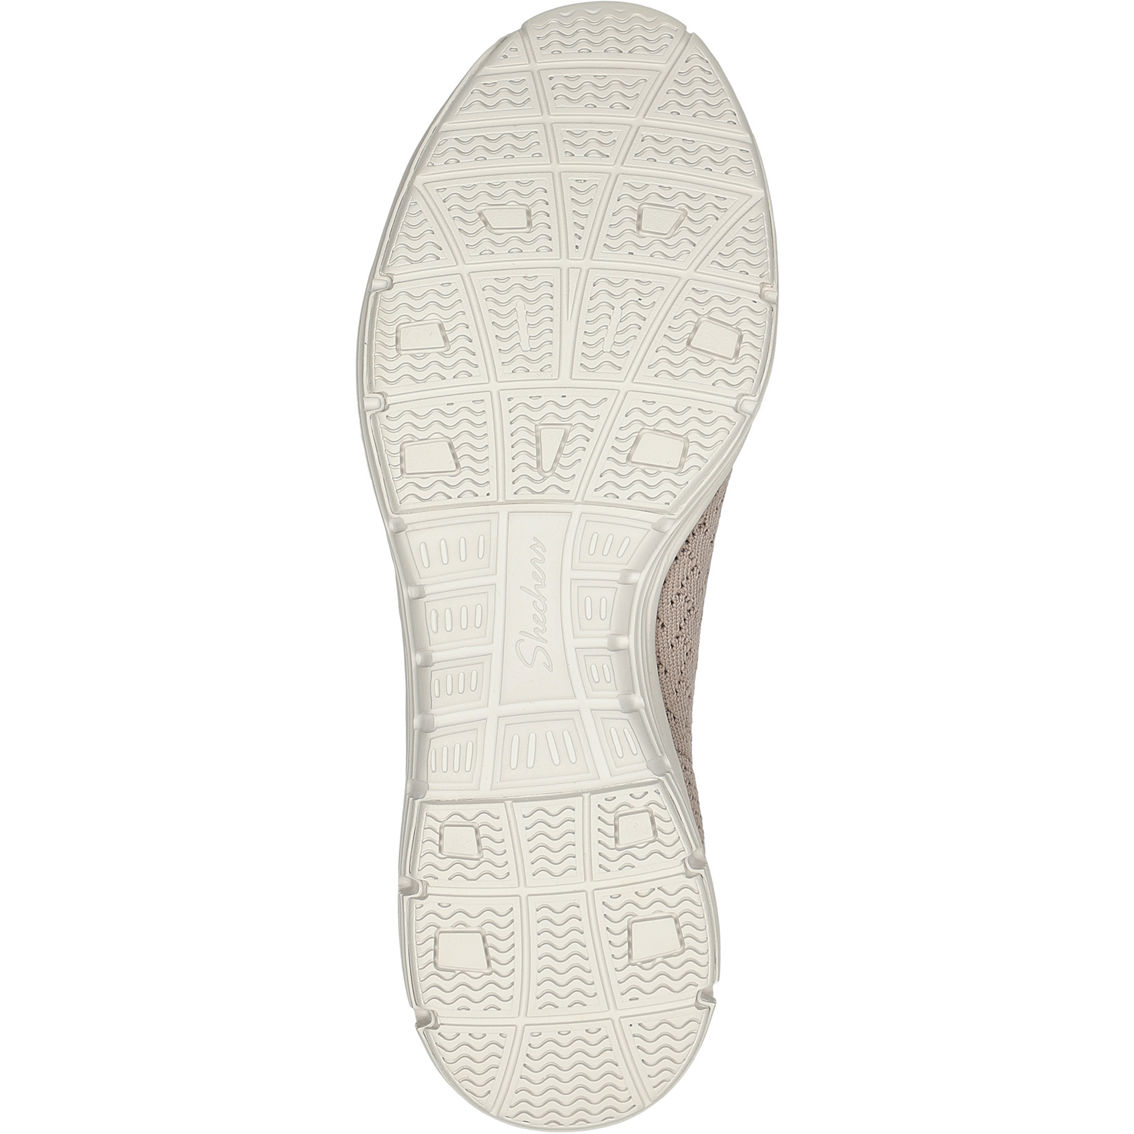 Skechers Seager Stat Slip Ons - Image 4 of 4